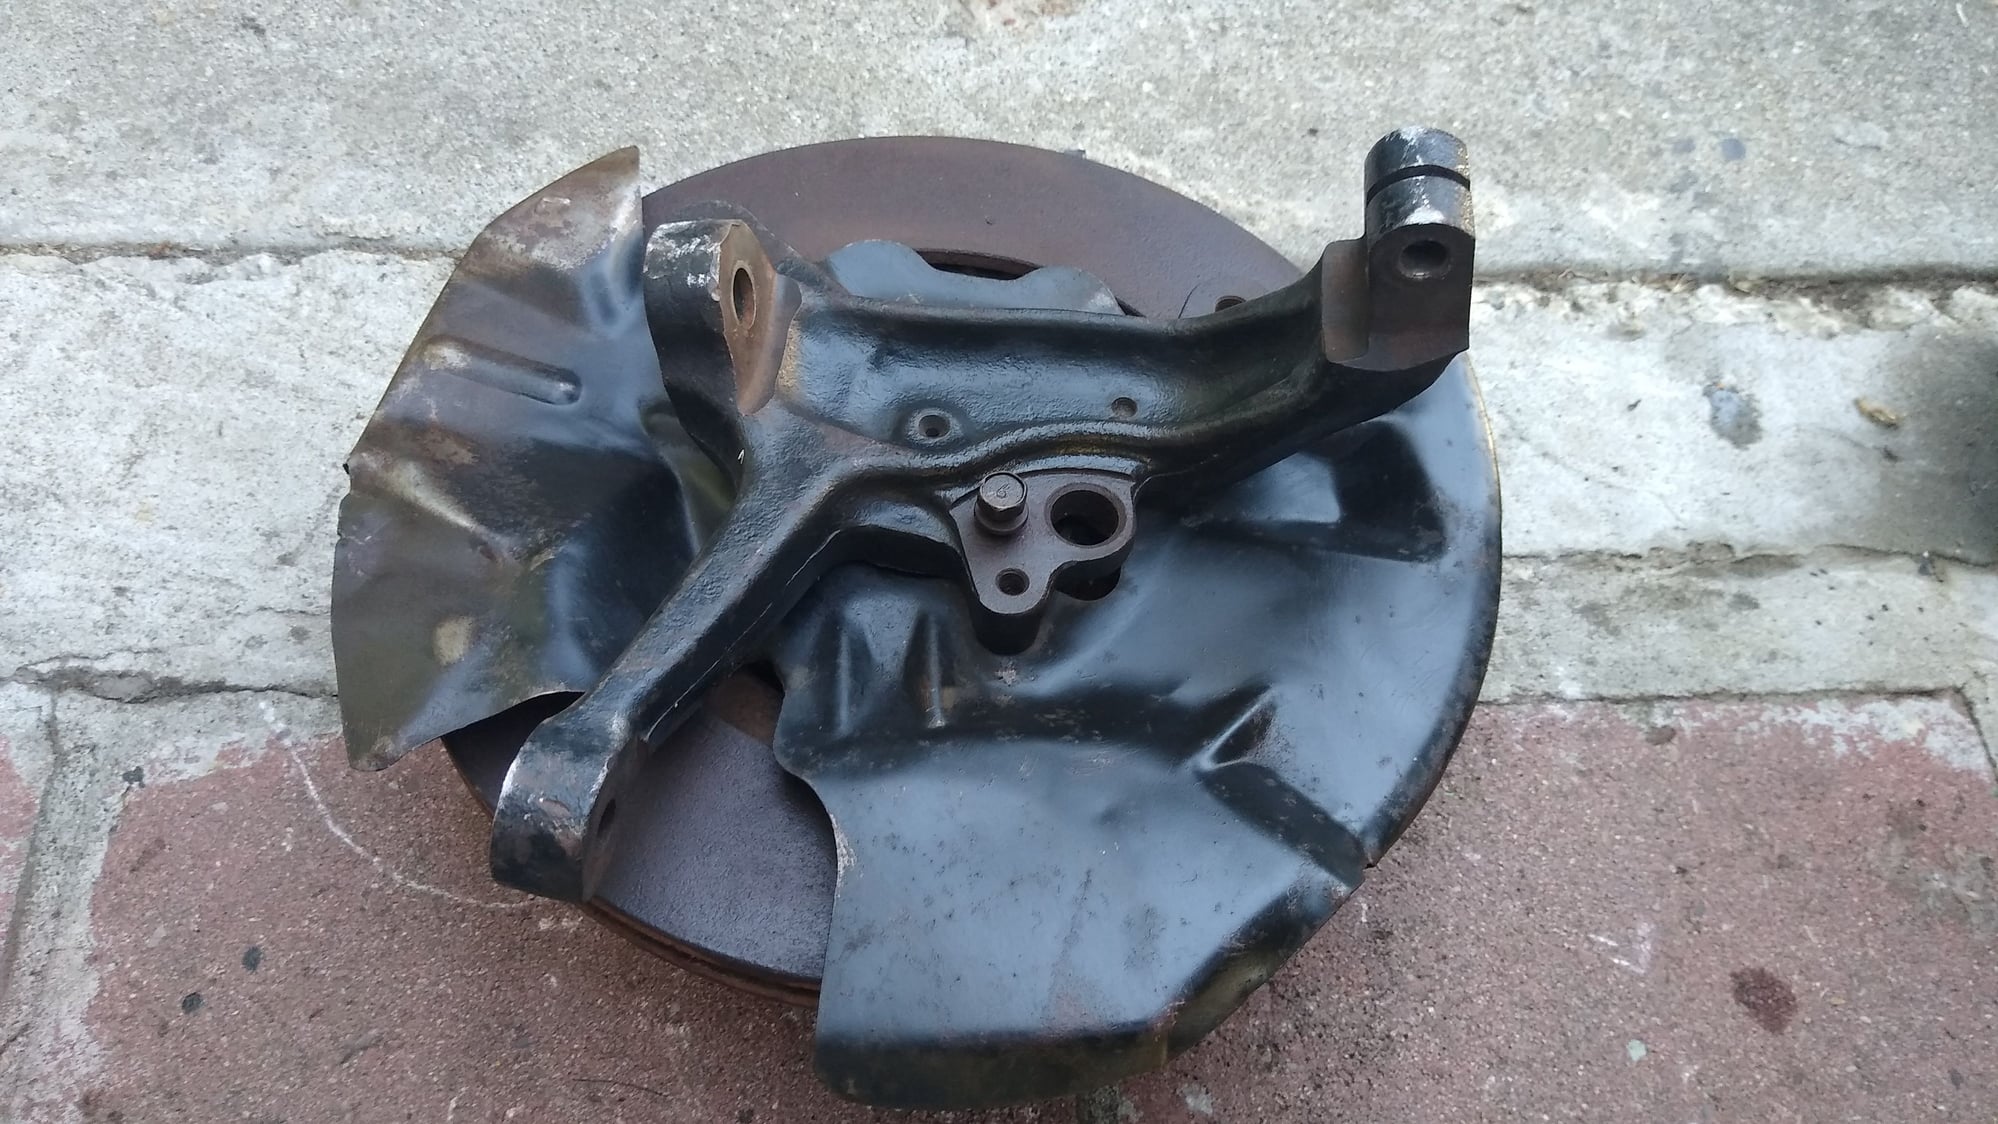 Miscellaneous - FD - OEM USDM Front Left Rotor, Brake Shield, Knuckle Assembly - Used - 1993 to 1995 Mazda RX-7 - San Jose, CA 95121, United States